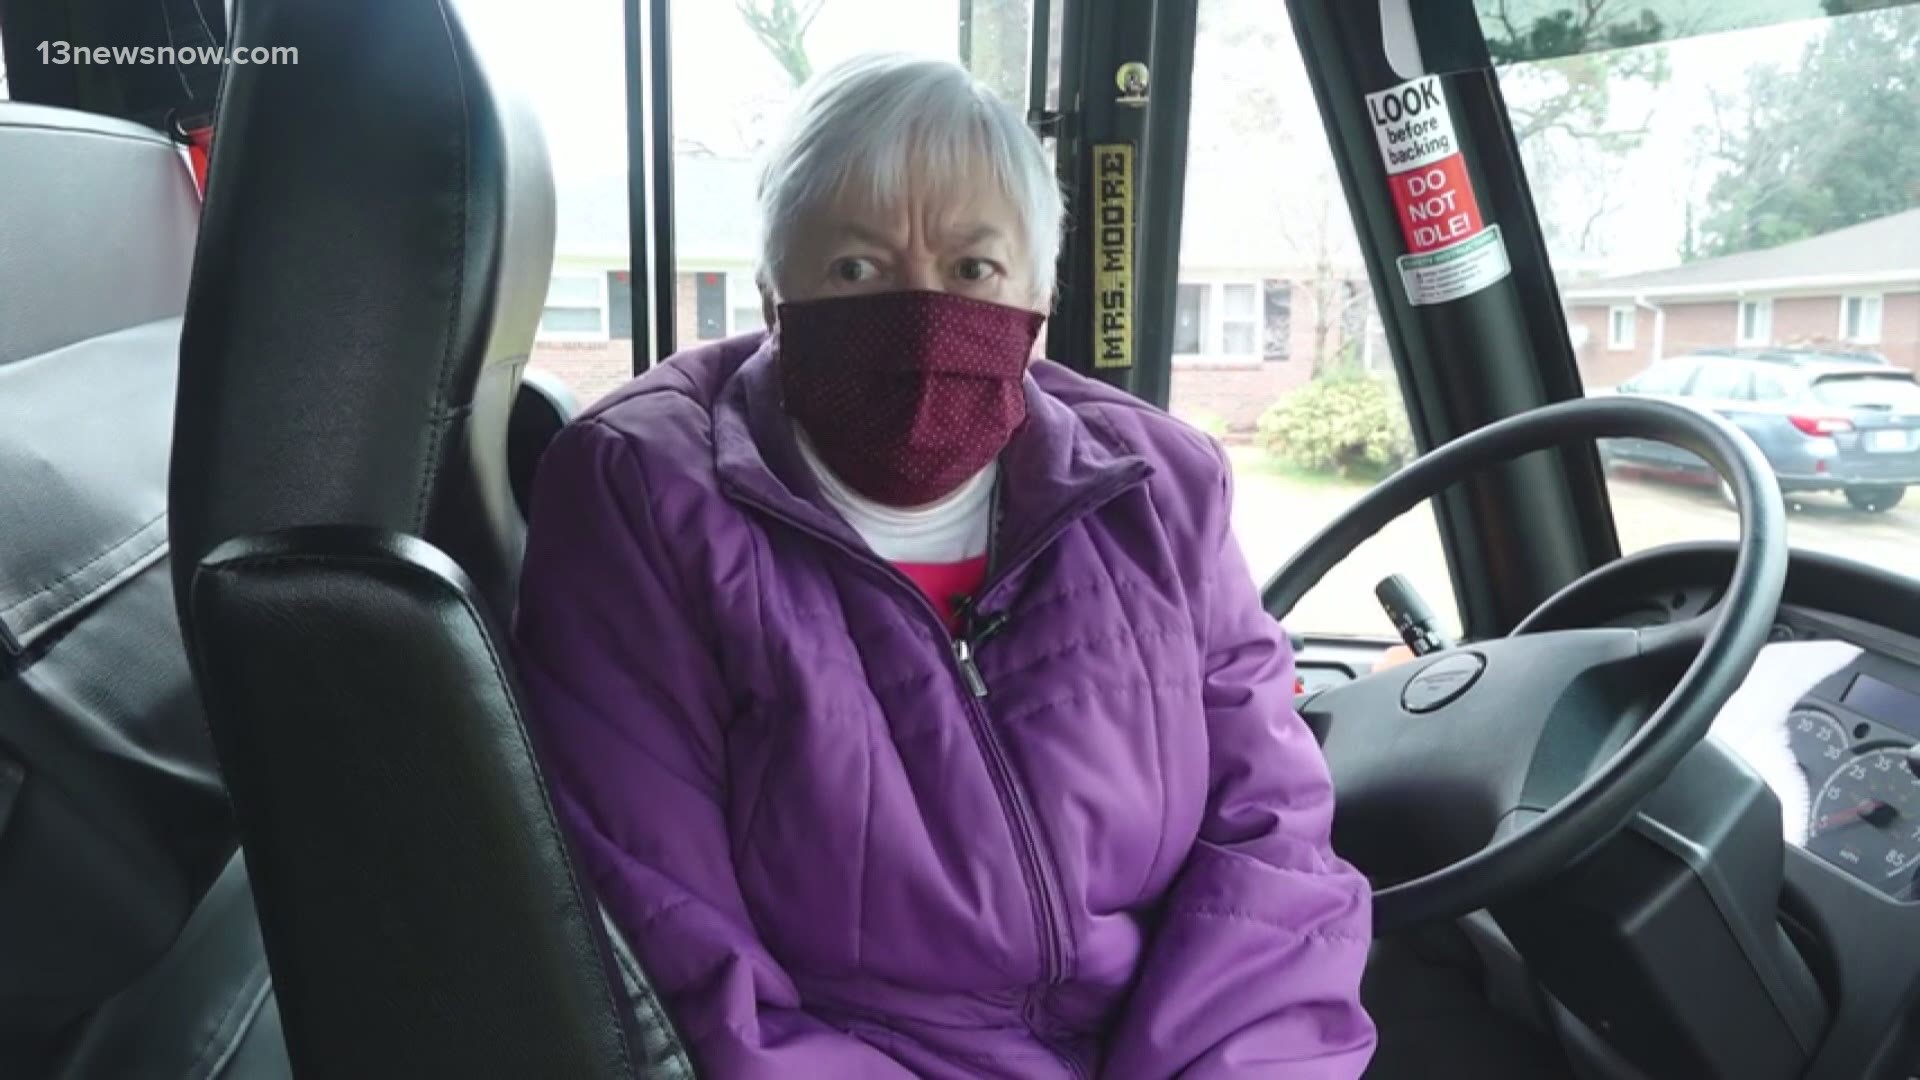 Despite Virginia Beach Public Schools being on virtual learning, one school bus driver has been going above and beyond to still be of service to her community.